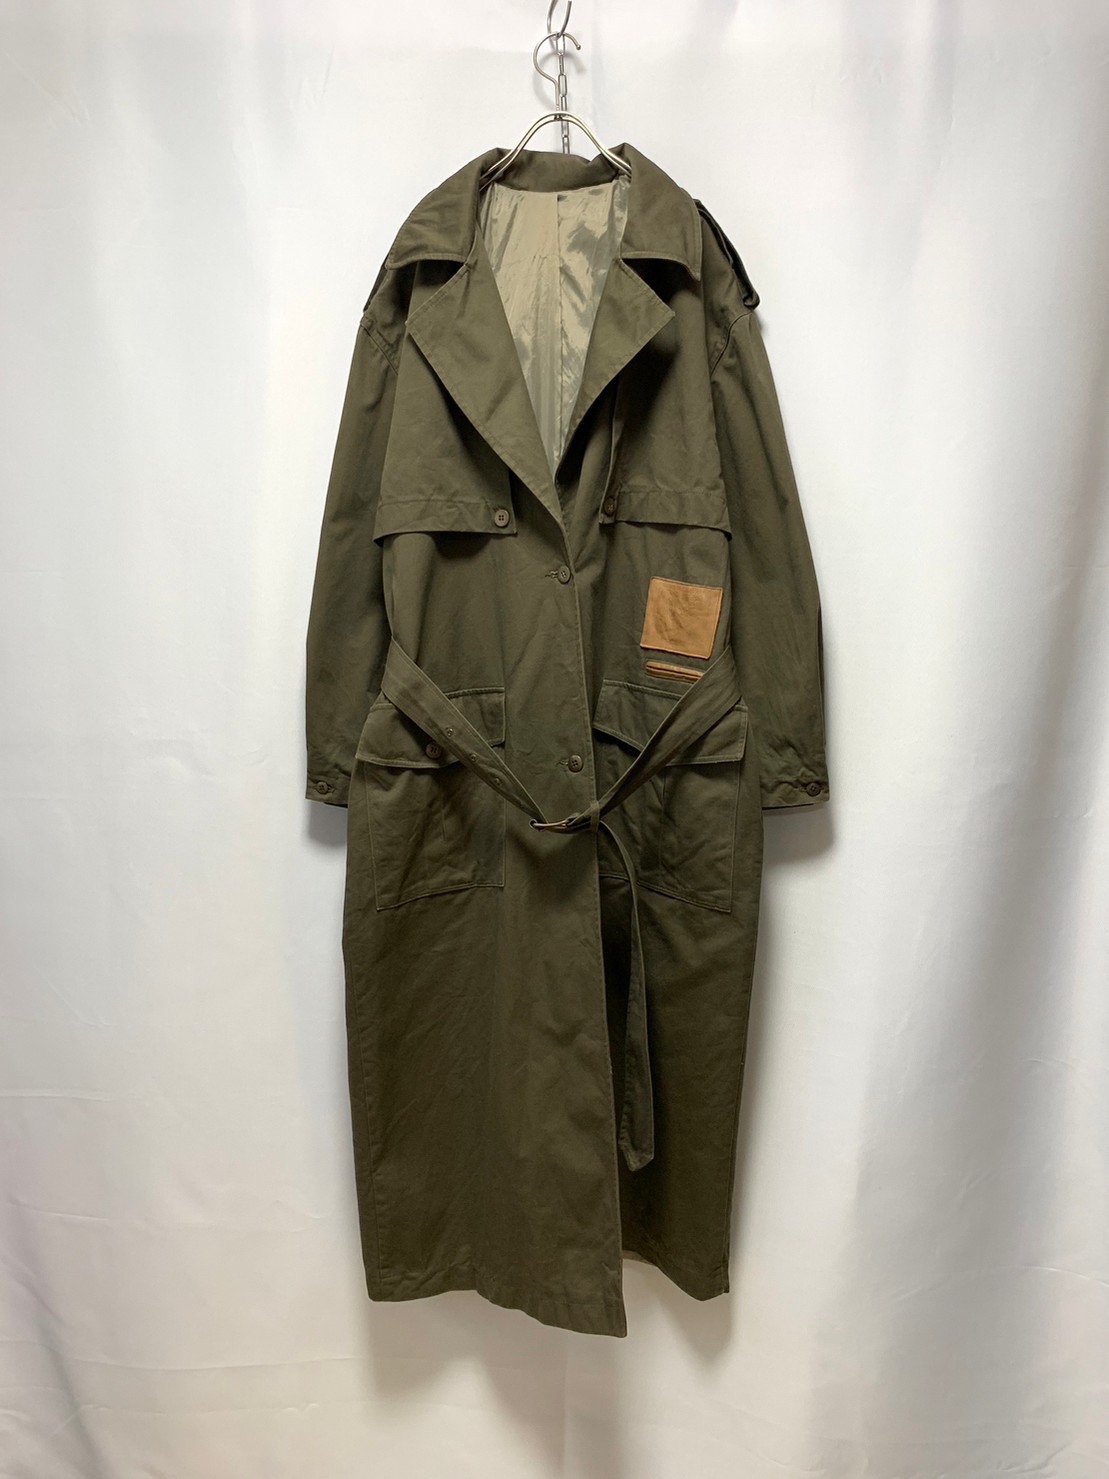 90’s “TOGETHER” Design Coat Made in USA